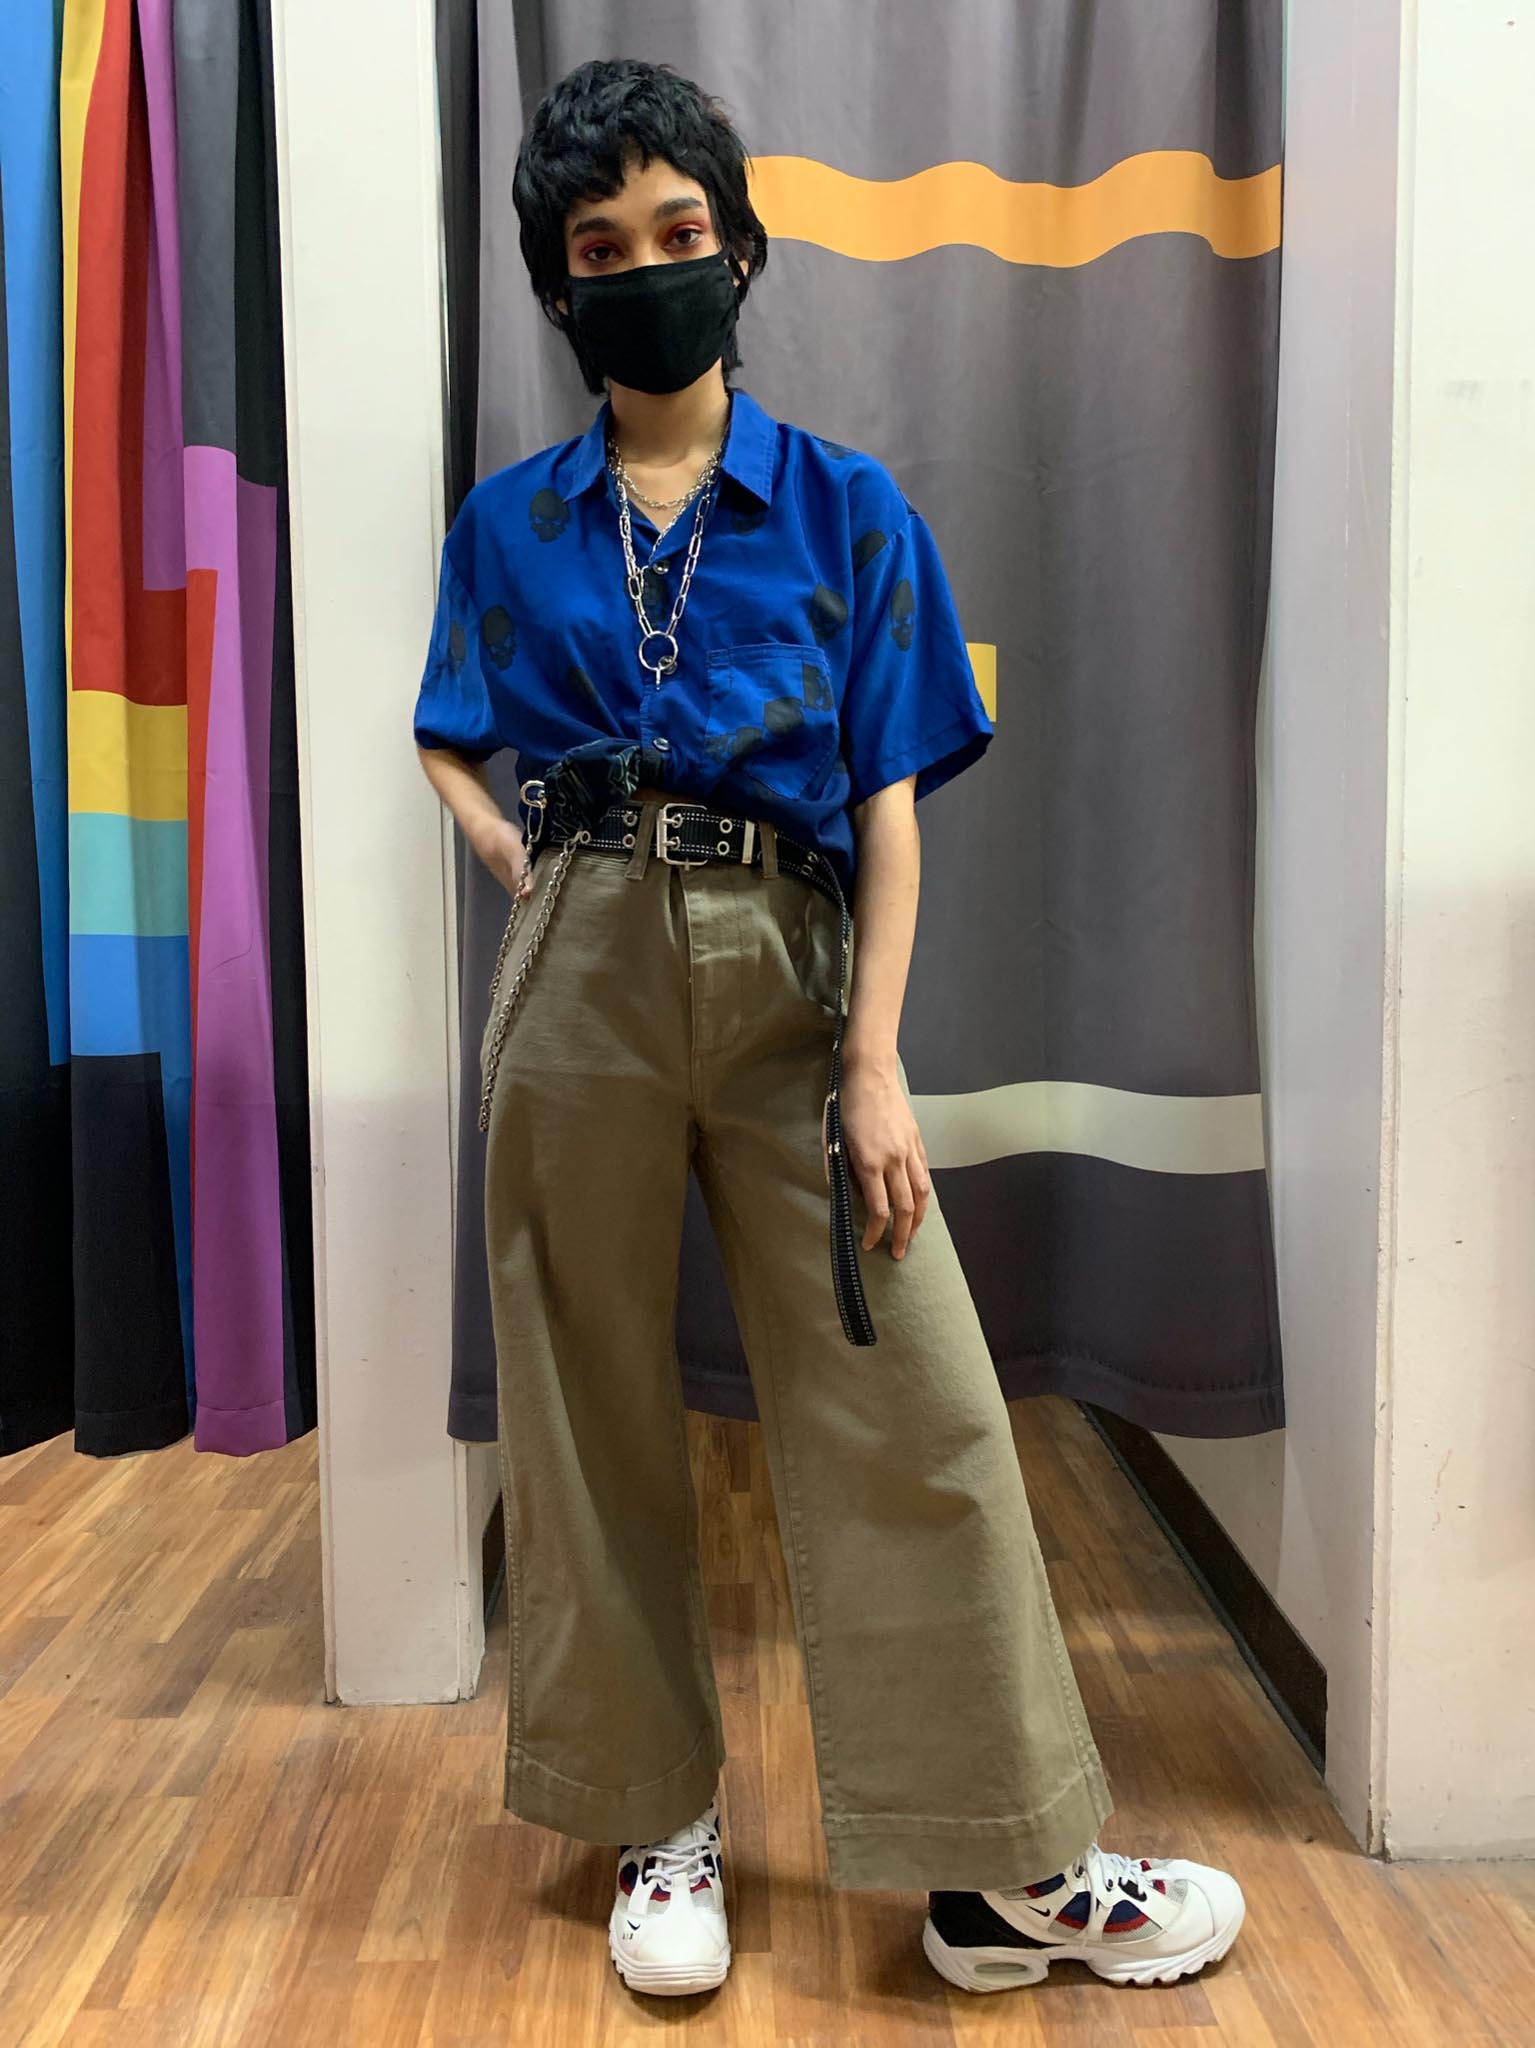 Person standing in front of Buffalo Exchange dressing room wearing royal blue short sleeved button down and wide leg khaki pants with metal jewelry and white Nike sneakers